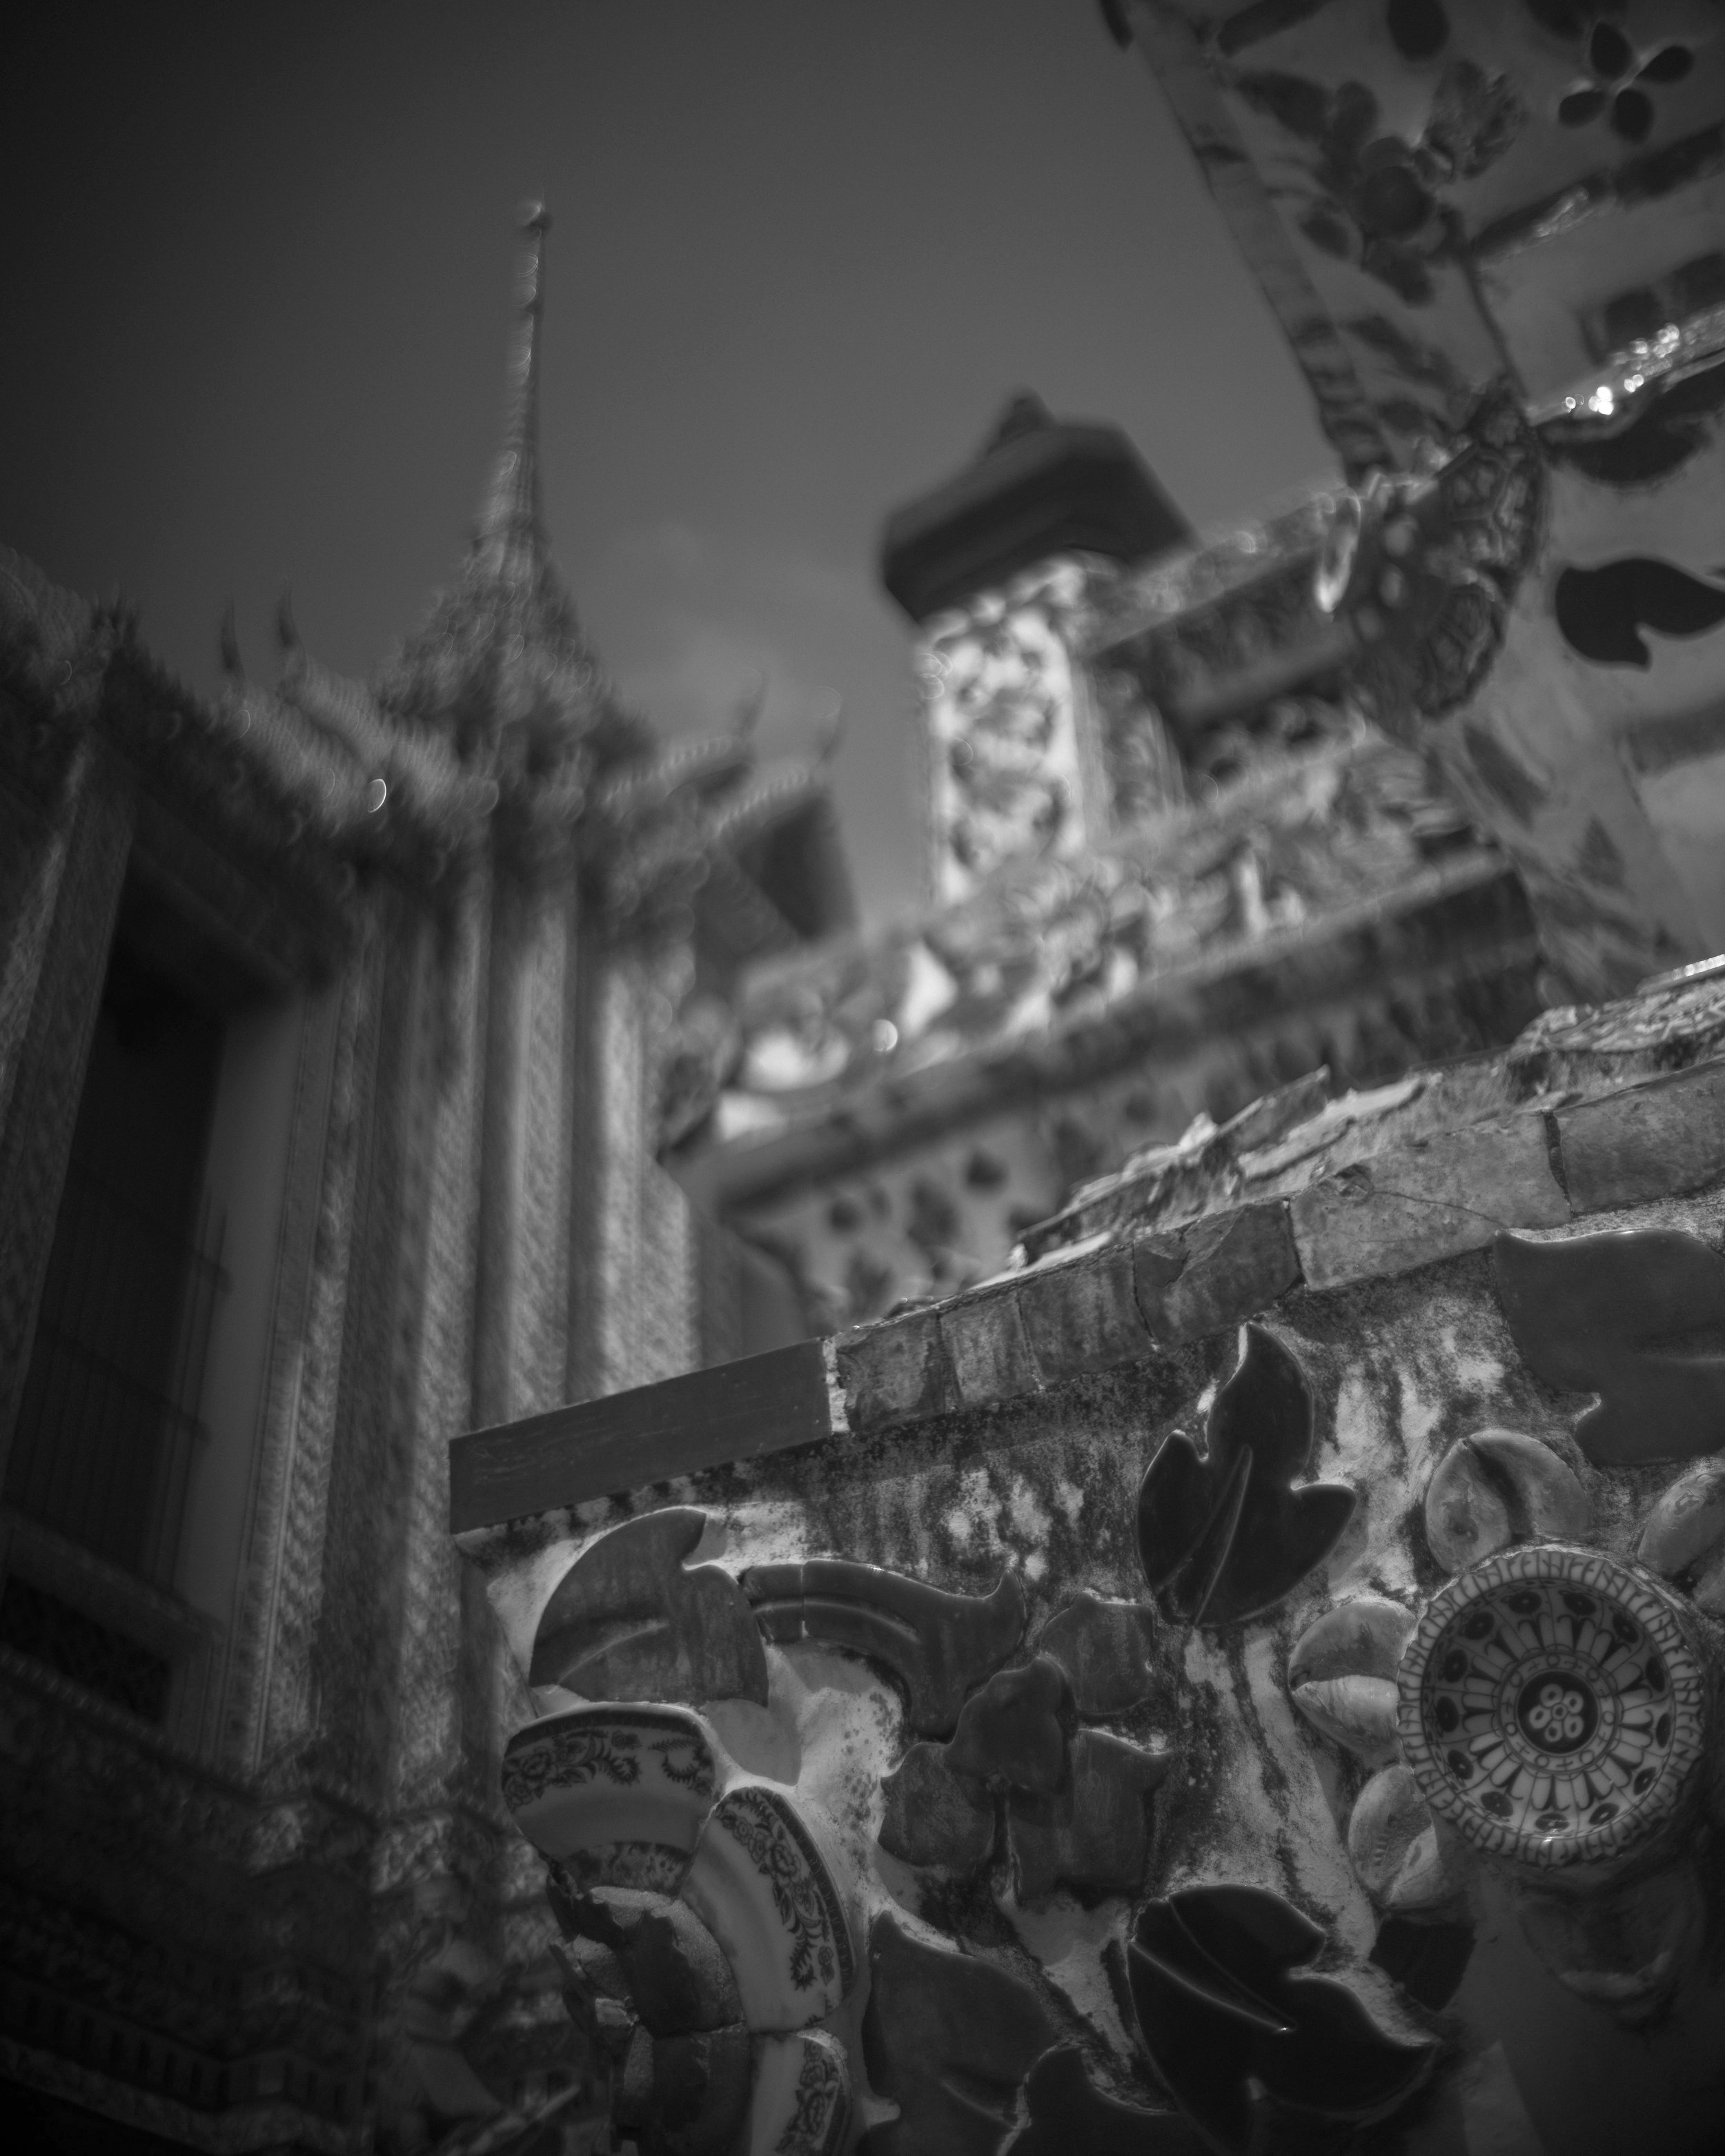 Krung Thep "Elevevations" Work.  Photography Provisionally Untitled . Photograph as part of the " ELEVATIONS" series. 39X48,7 inch. Digital, Black & White lambda Photo Paper or inkjet